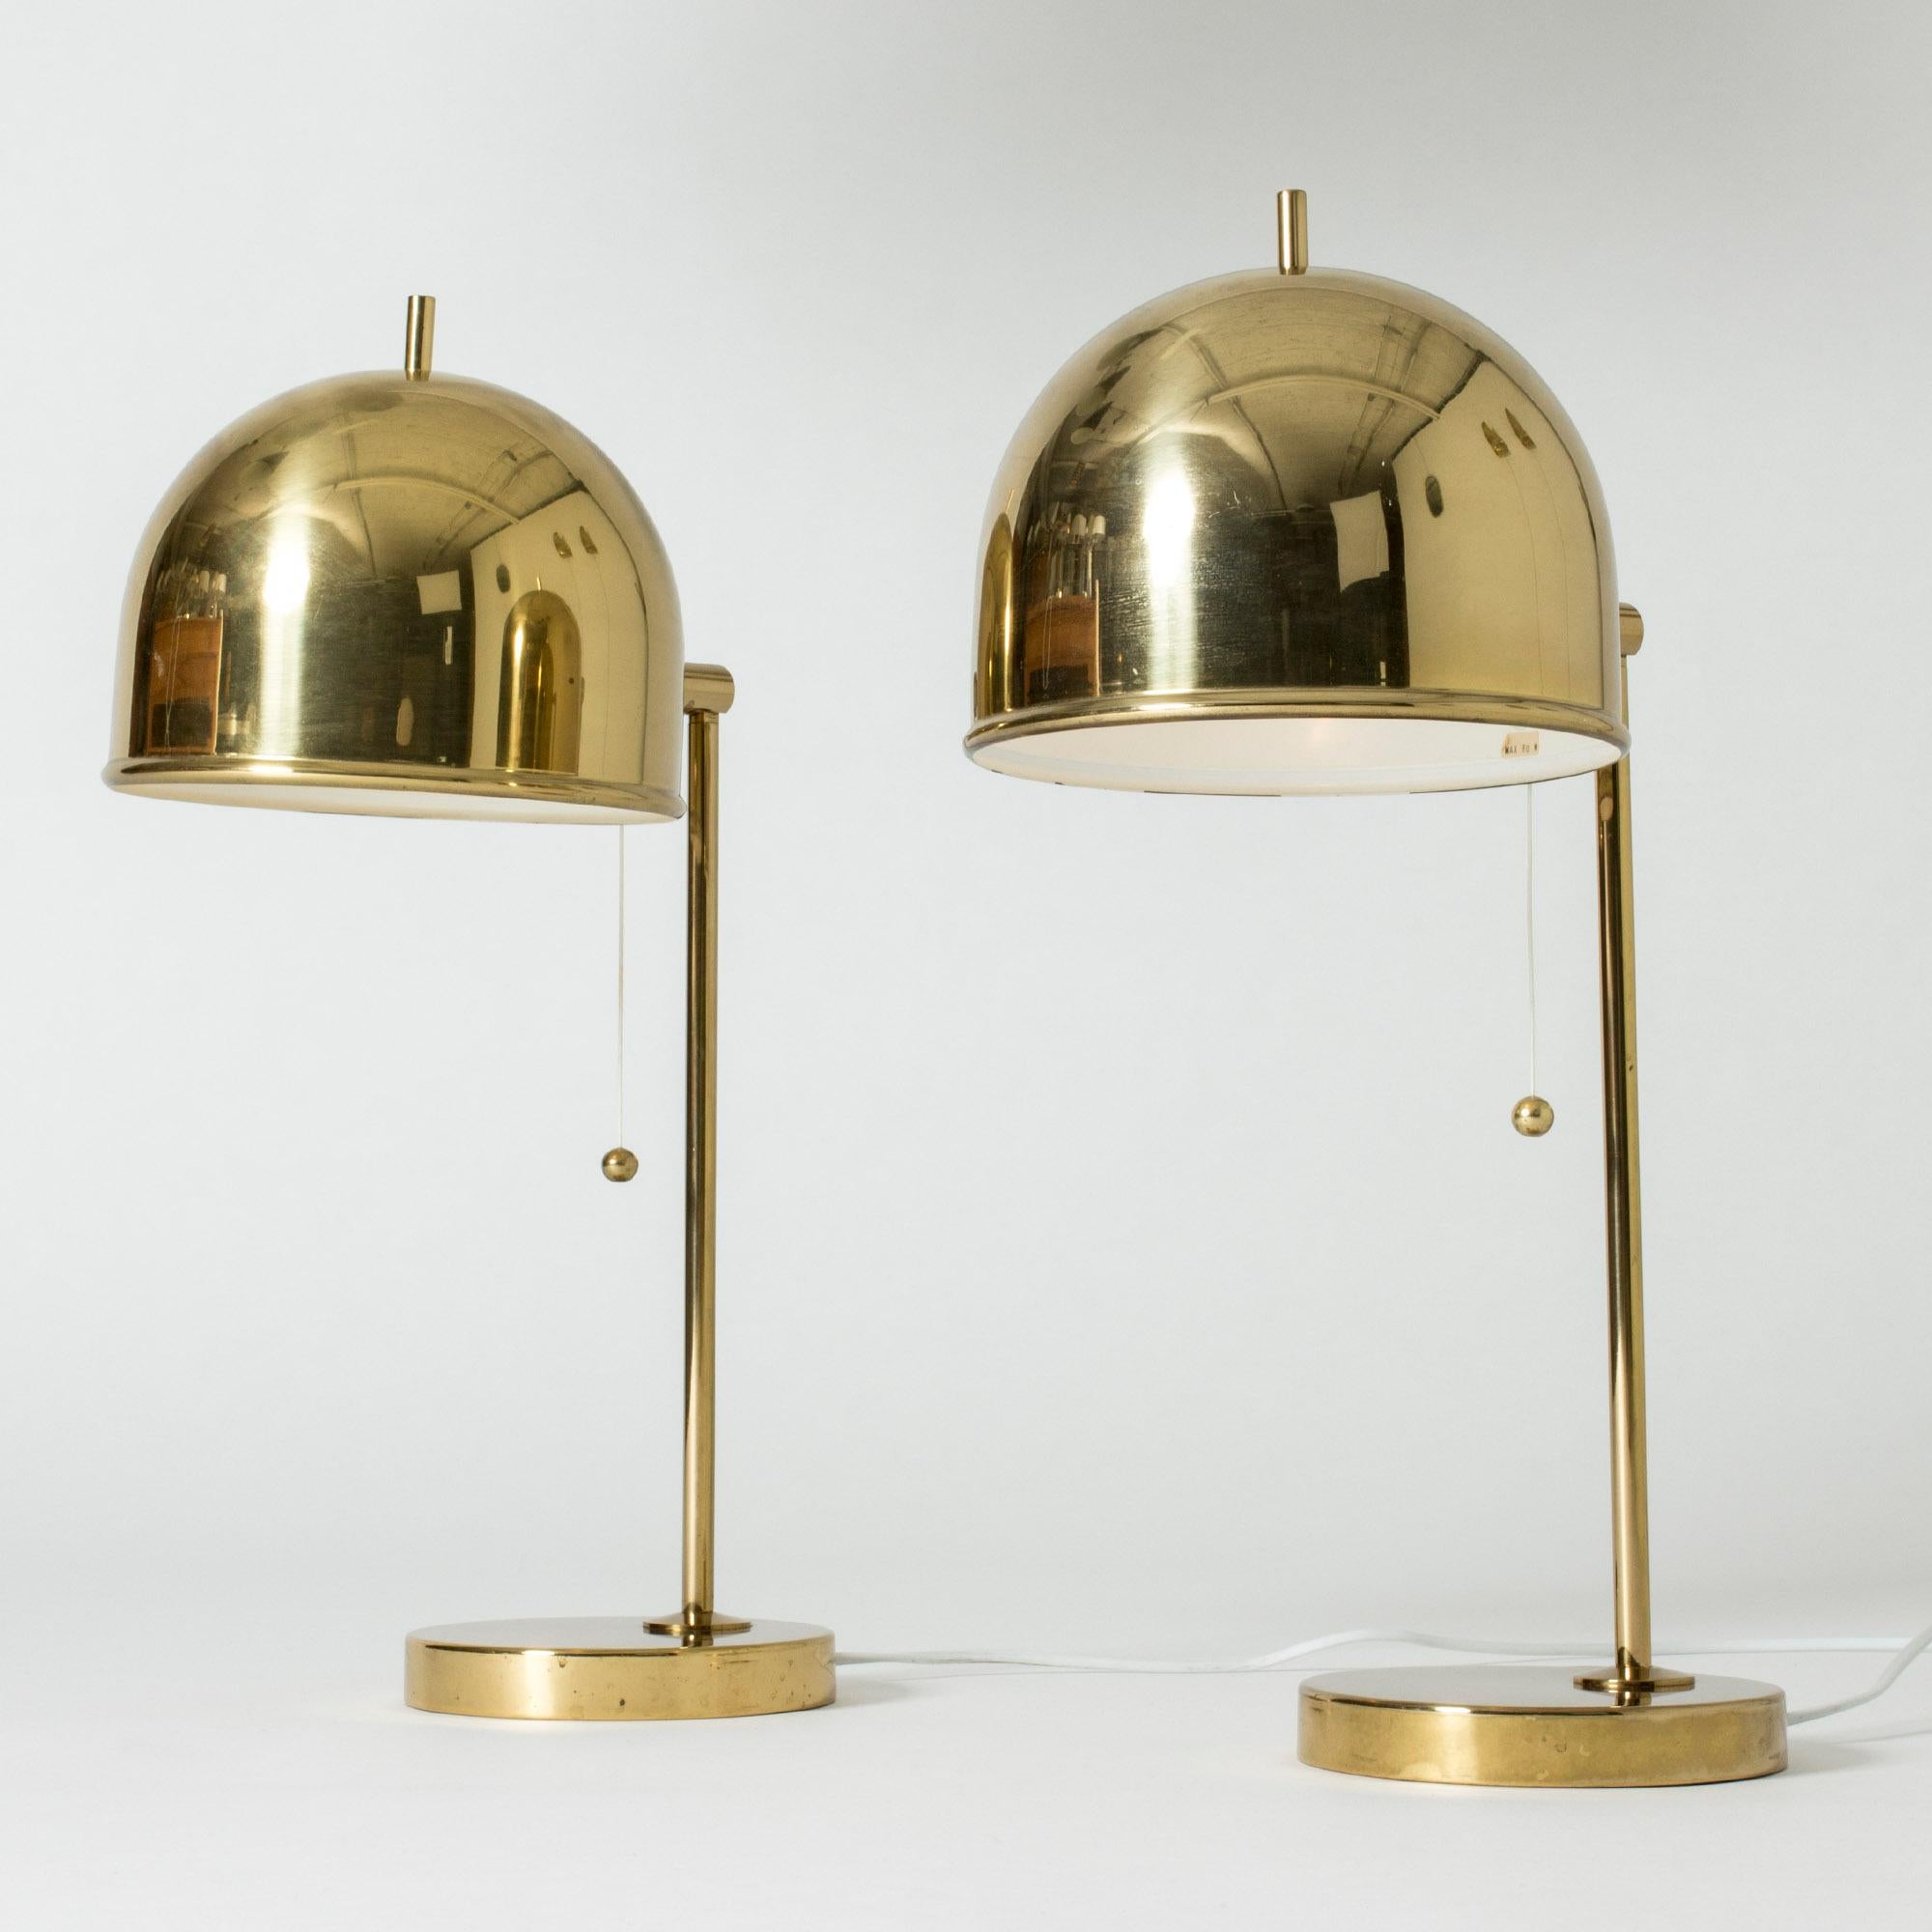 Pair of brass table lamps from Bergboms in a design that combines the generous arches of the shades with strict lines. The little tips on the tops of the shades add a whimsical look.